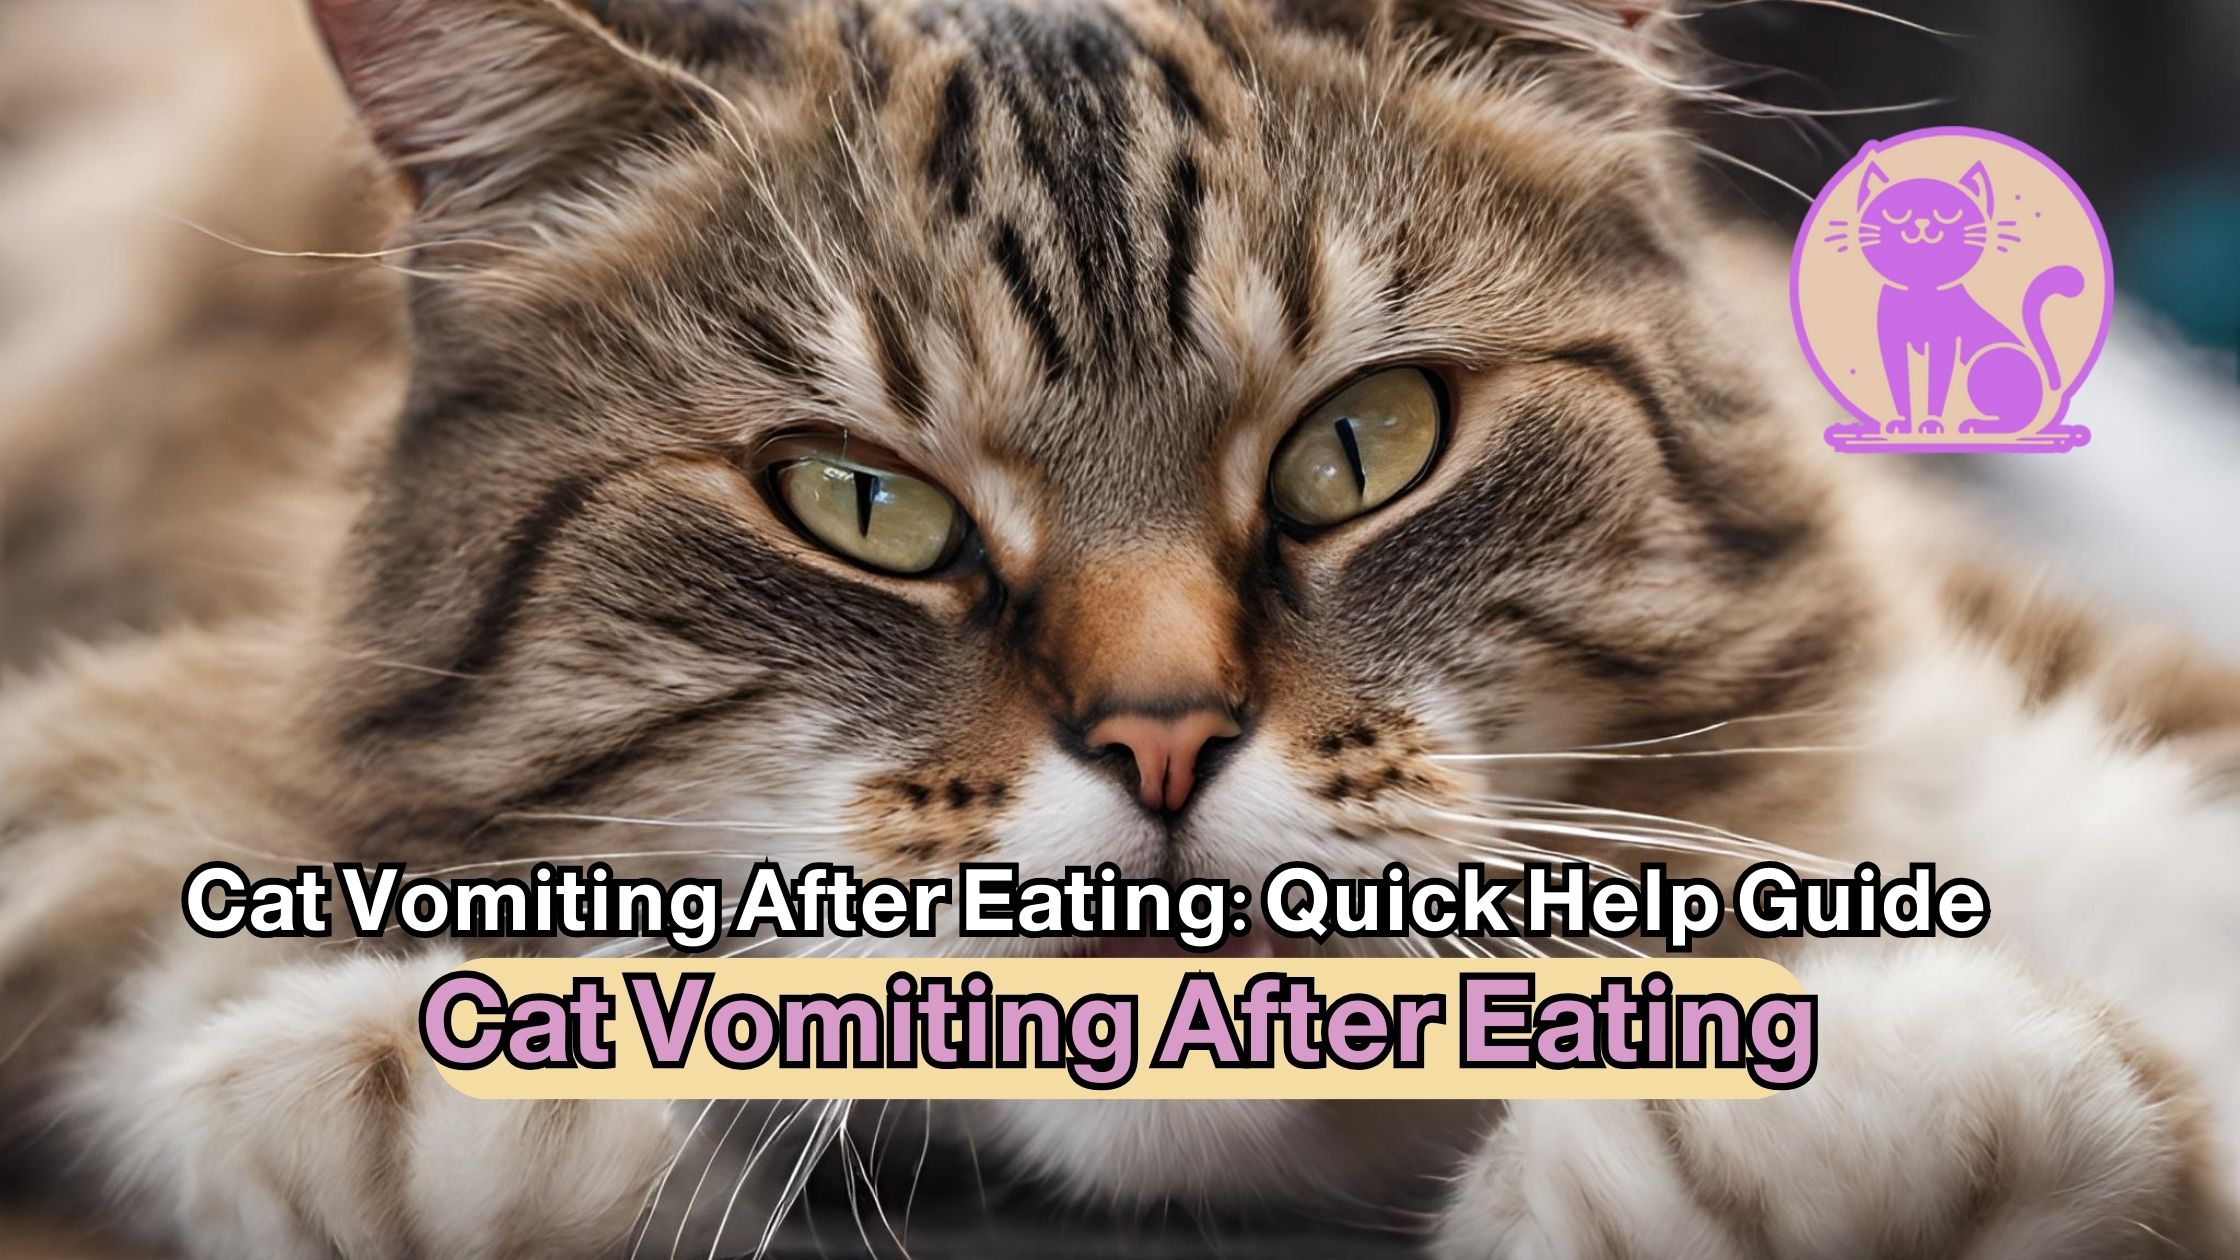 Cat Vomiting After Eating